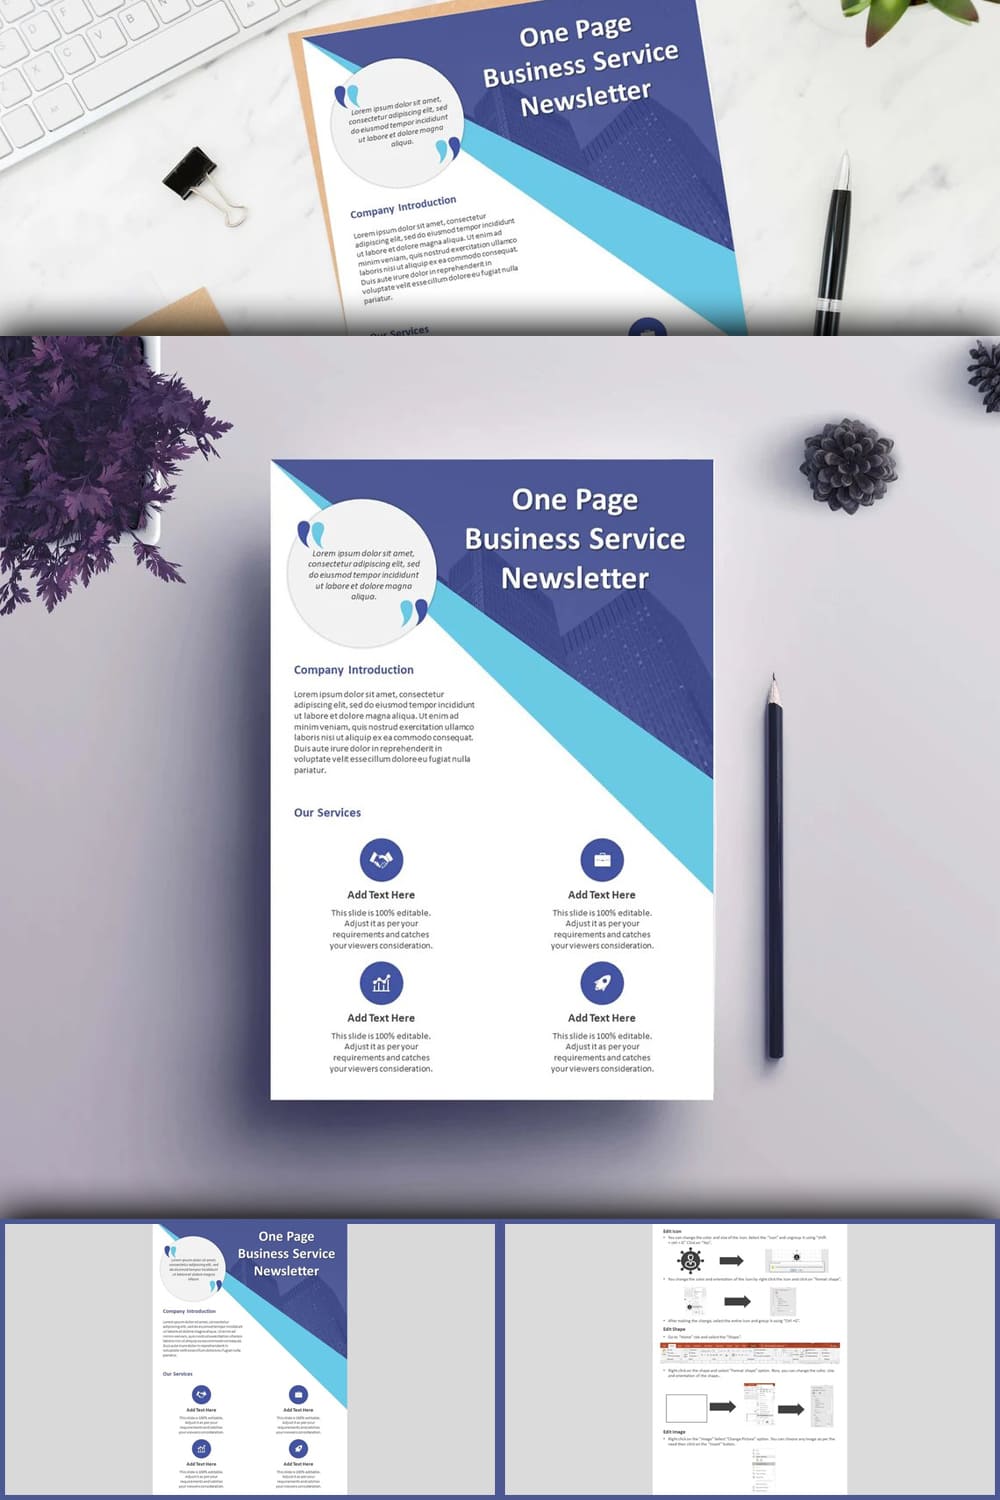 An image pack of an adorable newsletter presentation slide template.